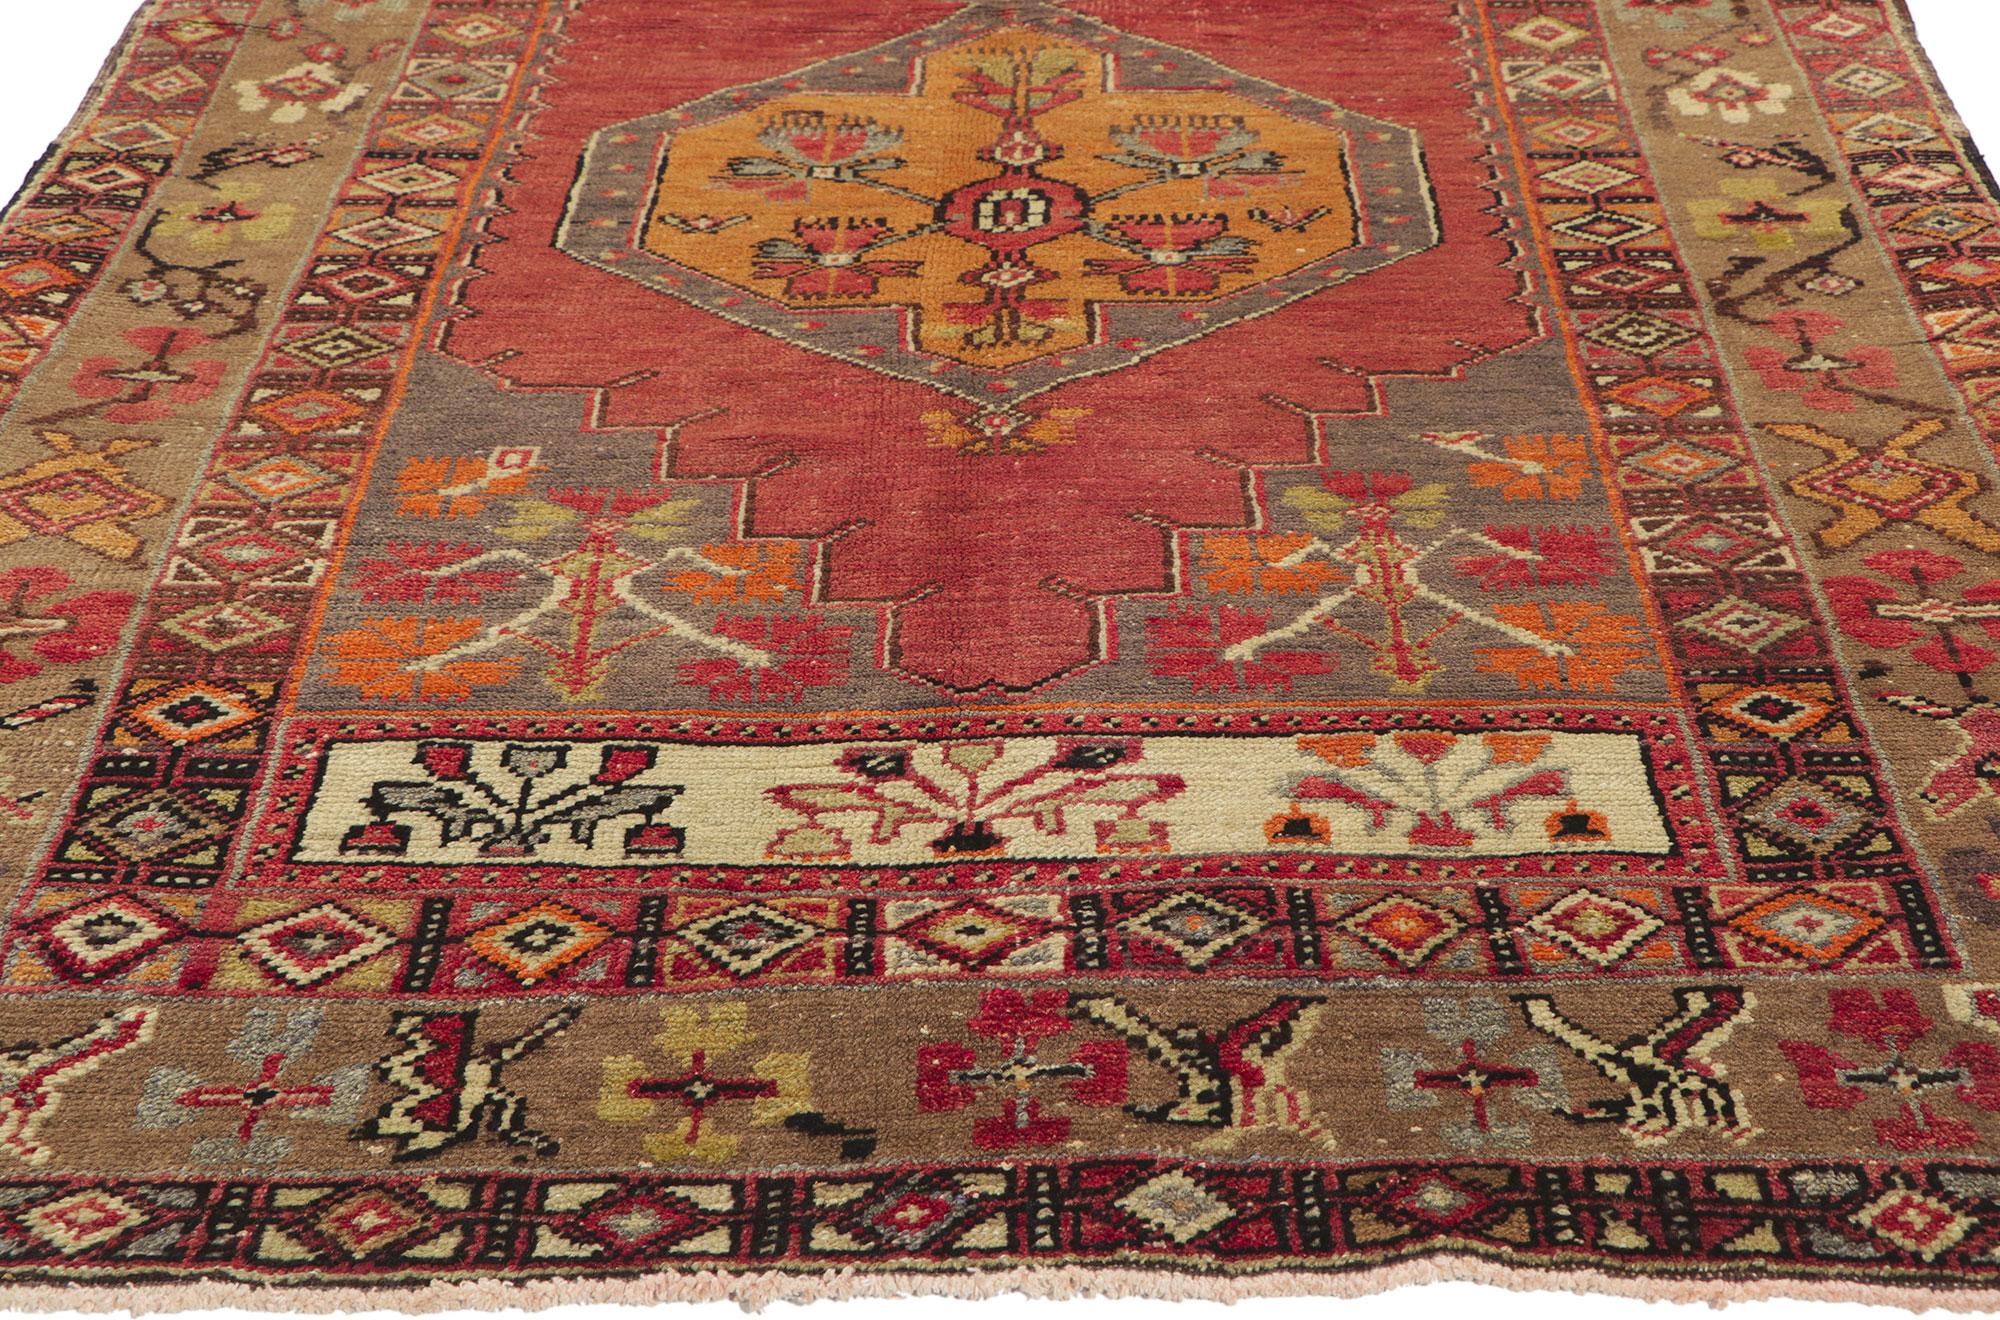 Vintage Turkish Oushak Rug Runner with Rustic Earth-Tone Colors For Sale 2